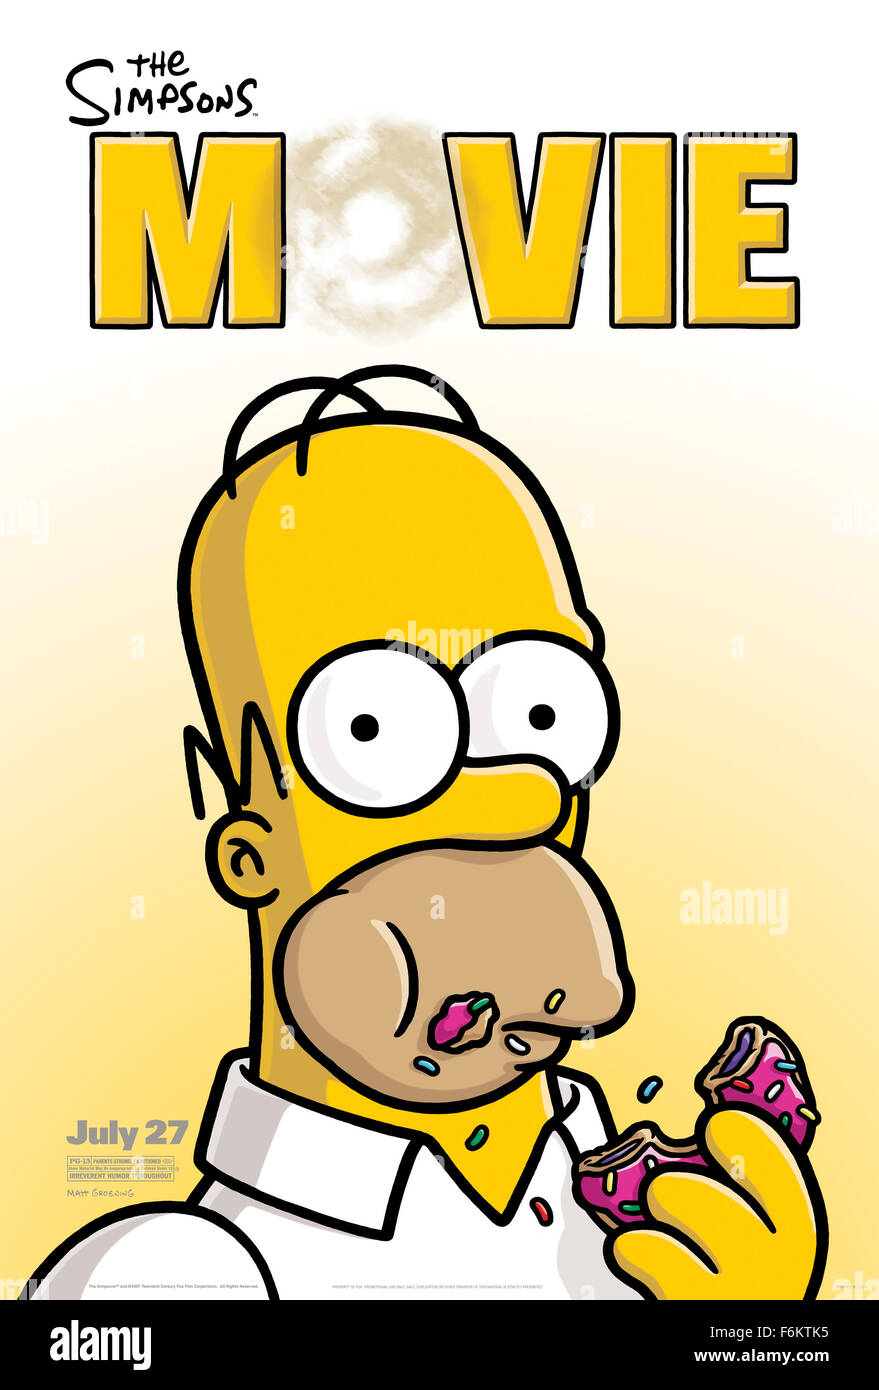 RELEASE DATE: July 27, 2007. MOVIE TITLE: The Simpsons Movie - STUDIO: Akom Production Company. ORIGINAL ARTWORK BY: Matt Groening. PLOT: After Homer accidentally pollutes the town's water supply, Springfield is encased in a gigantic dome by the EPA and the Simpsons family are declared fugitives. PICTURED: Homer Simpsons, Movie Poster. Stock Photo